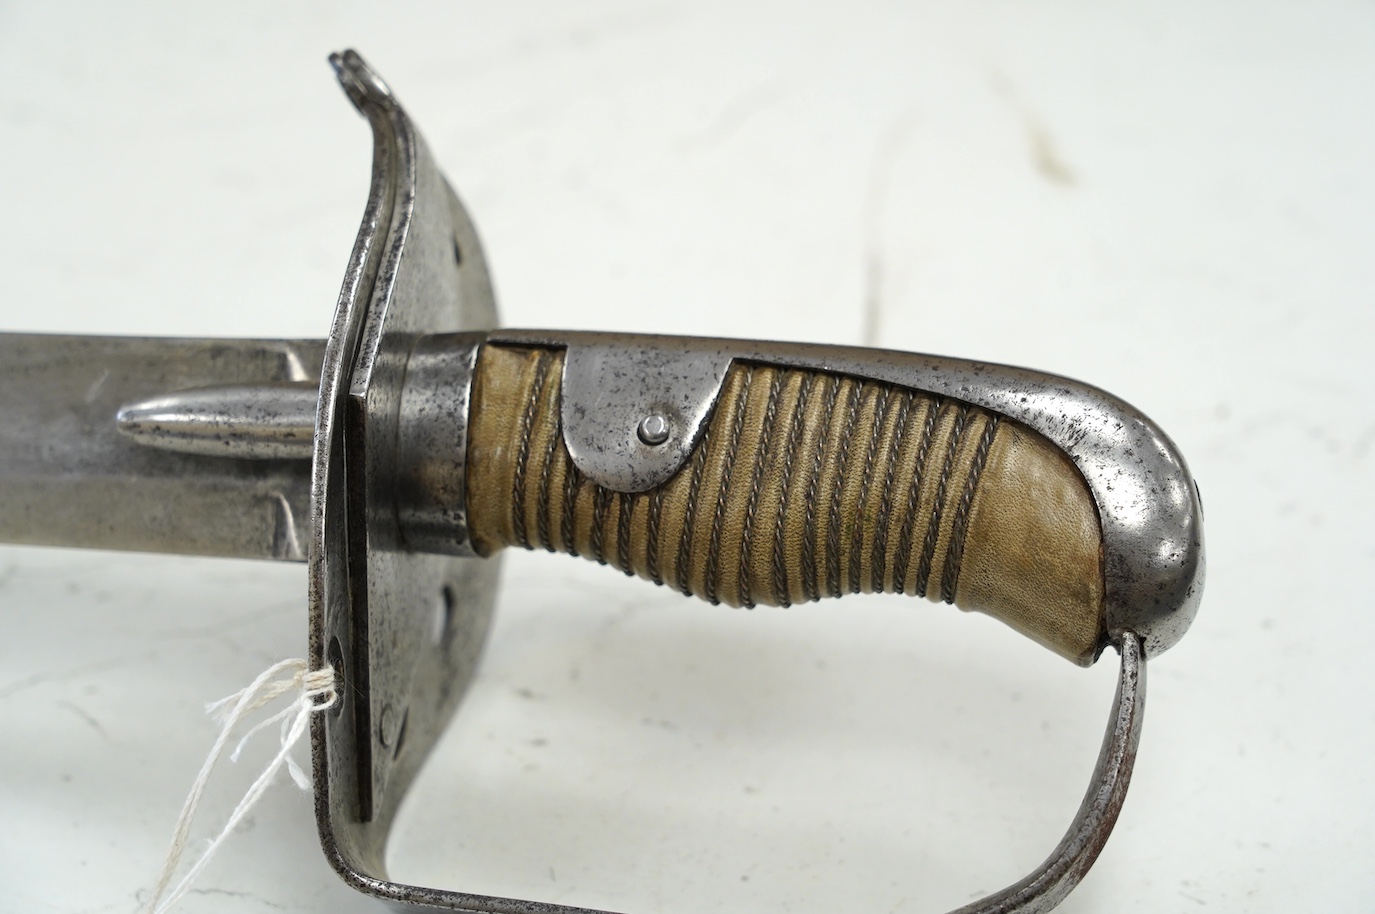 A 1796 heavy cavalry trooper’s sword, regulation blade stamped Dawes, with inspector’s mark, spear point, regulation hilt with side guard removed, grip replaced, blade 88cm. Condition - fair, age wear overall